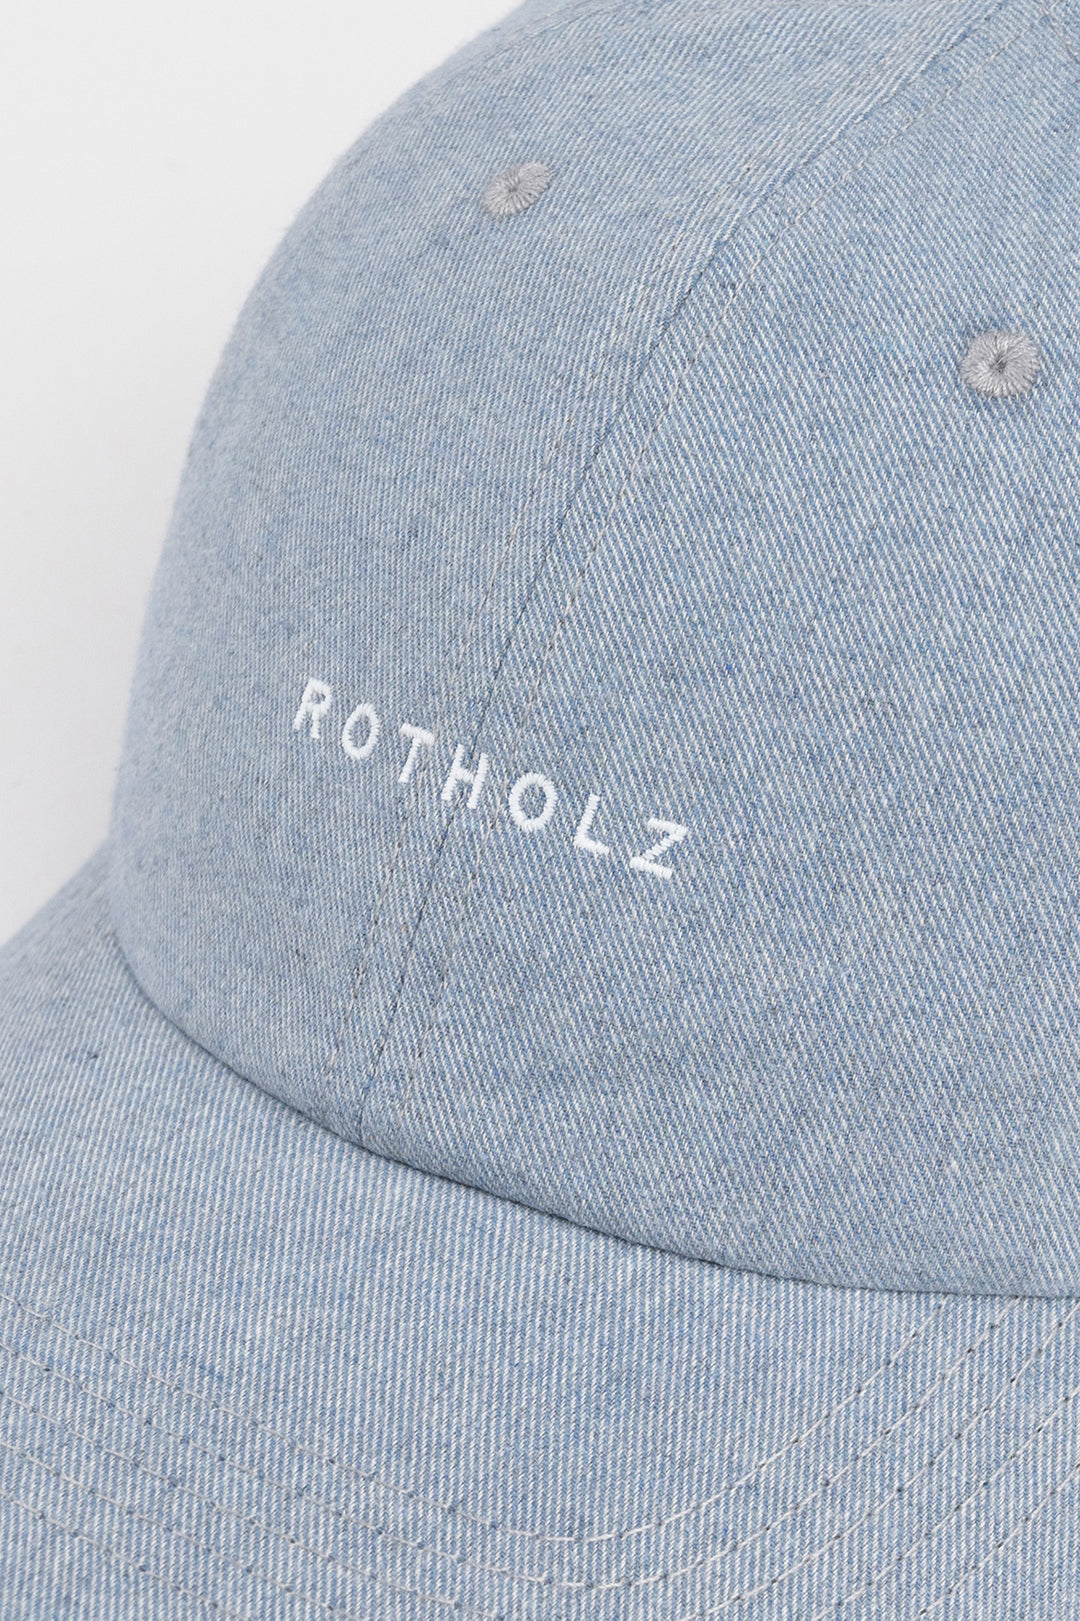 Blue-grey cap logo made of 100% organic cotton from Rotholz